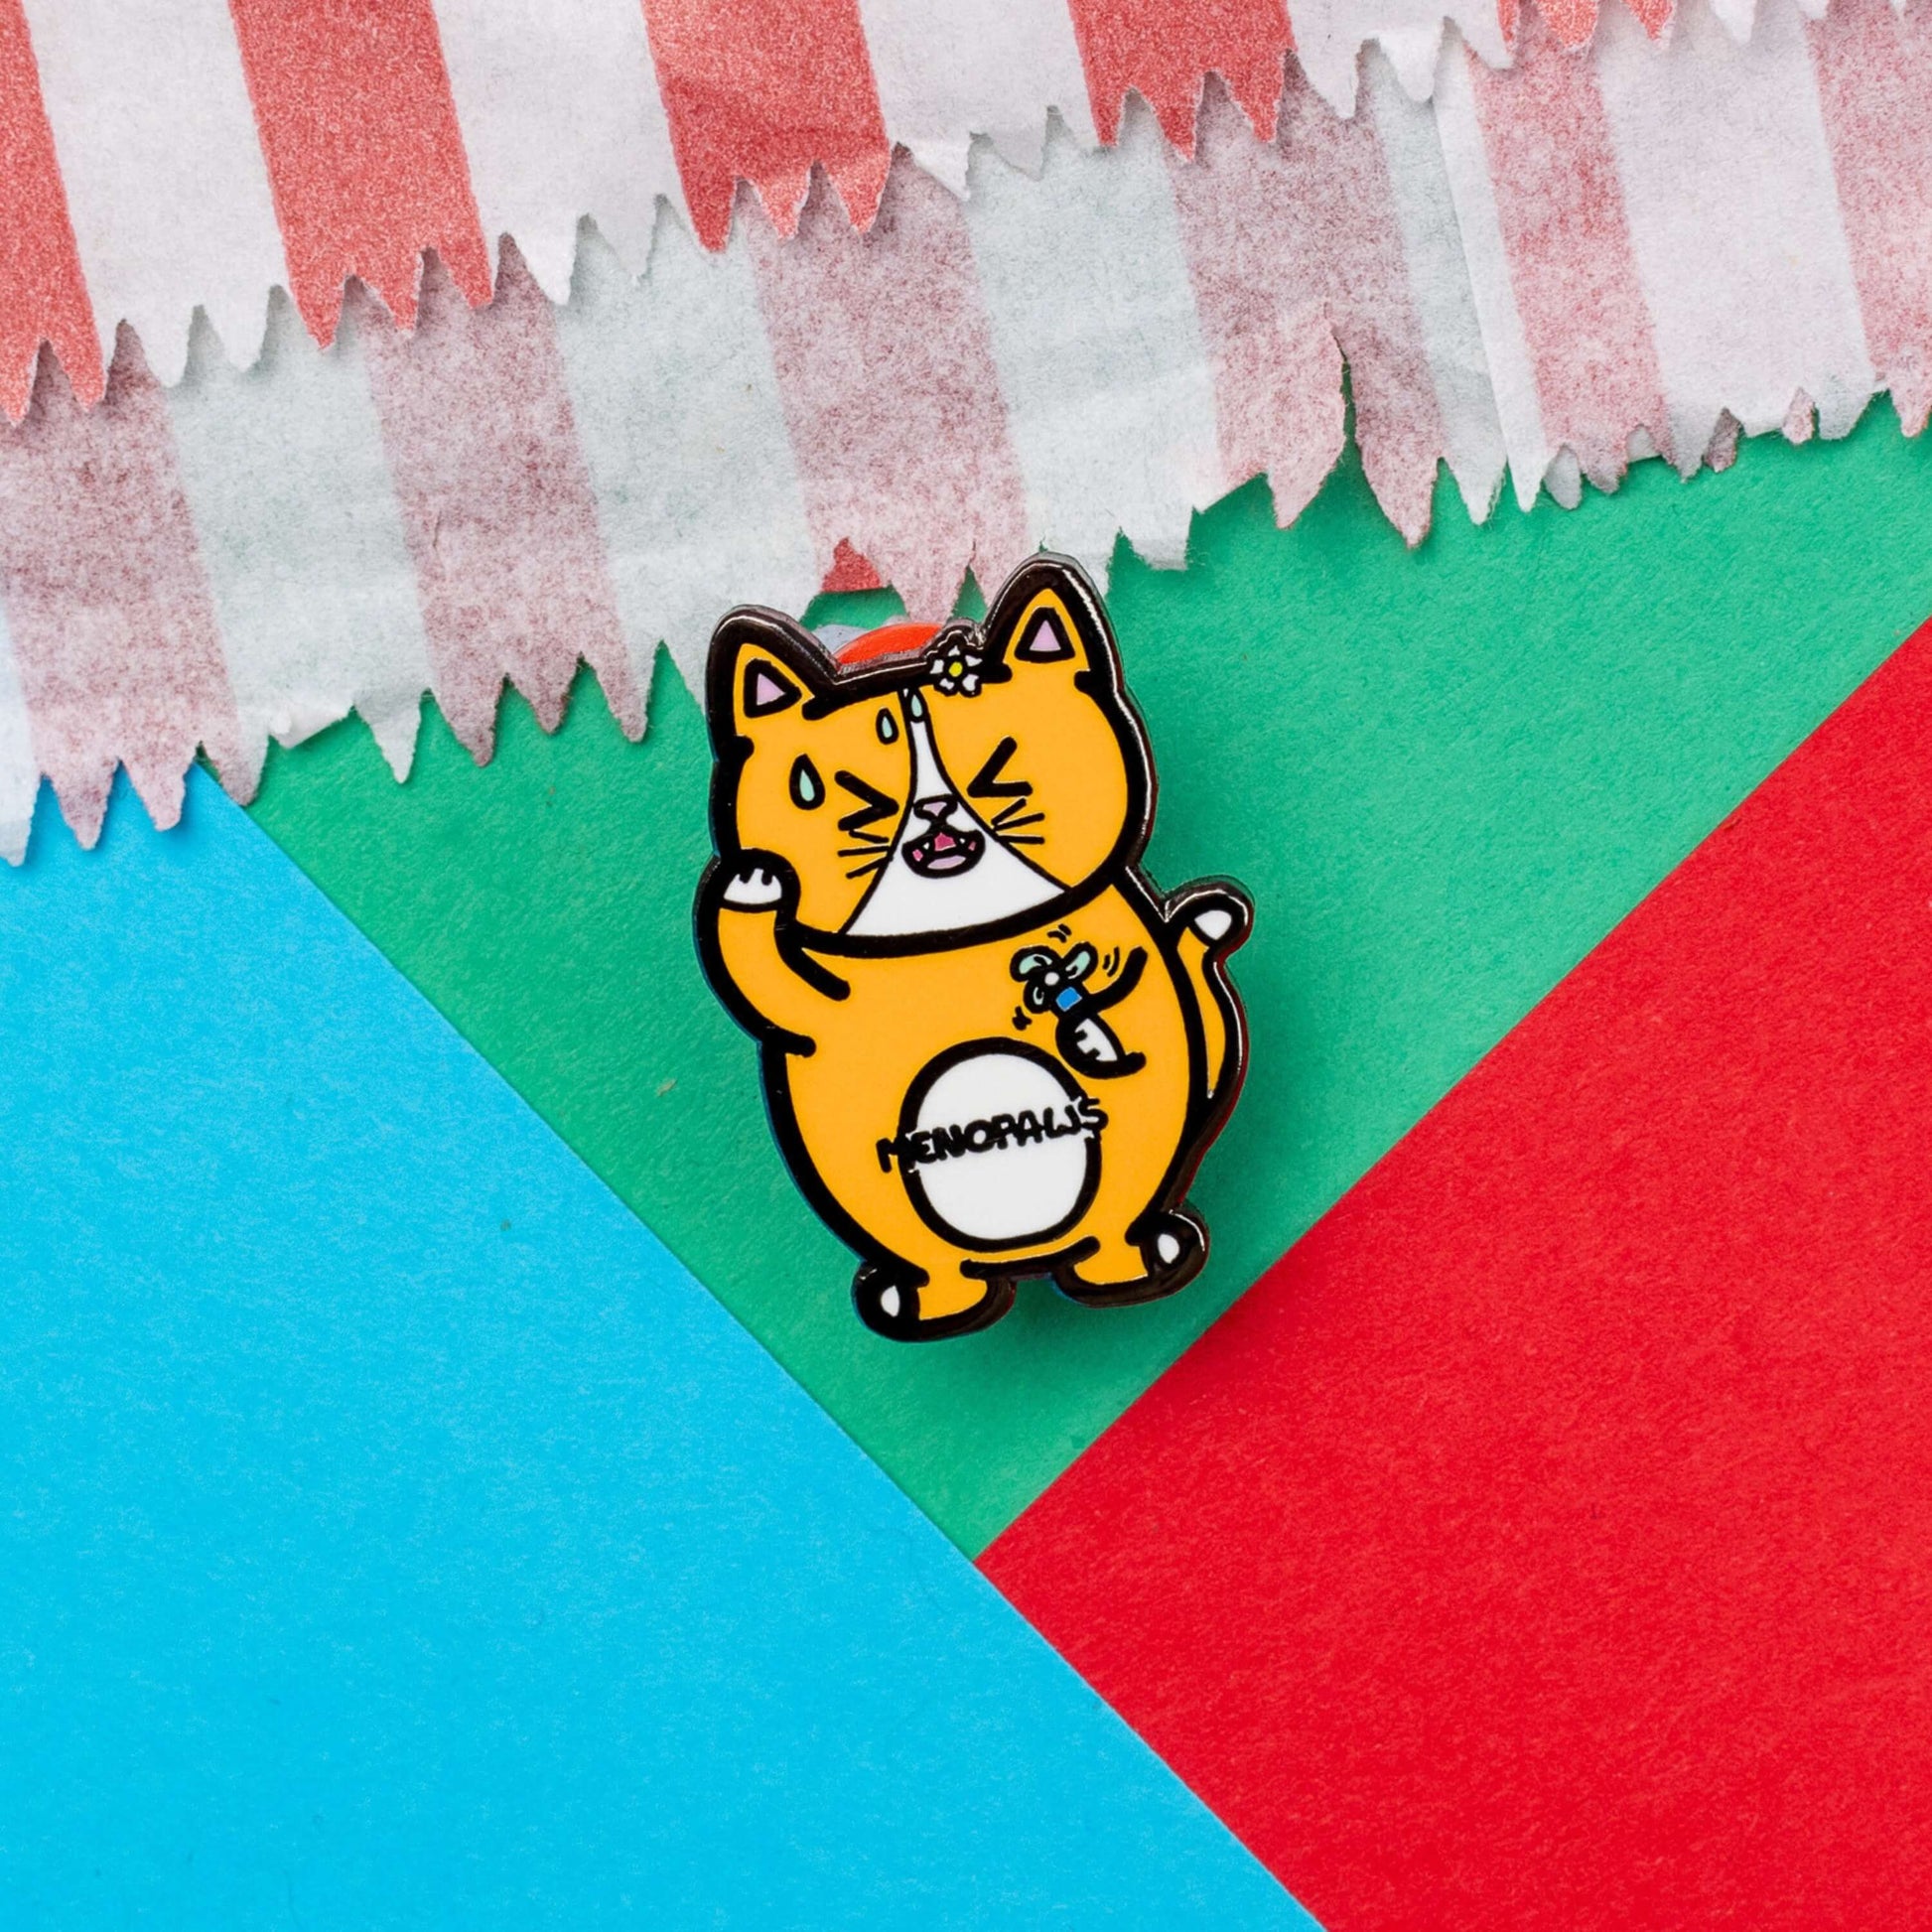 Menopaws Enamel Pin - Menopause on a red, blue and green card background. The enamel pin is of a menopausal ginger and white cat with a daisy in it's hair. The cat is holding an electric fan and is looking hot with sweat droplets on it's face. Hand drawn design made to raise awareness for menopause.